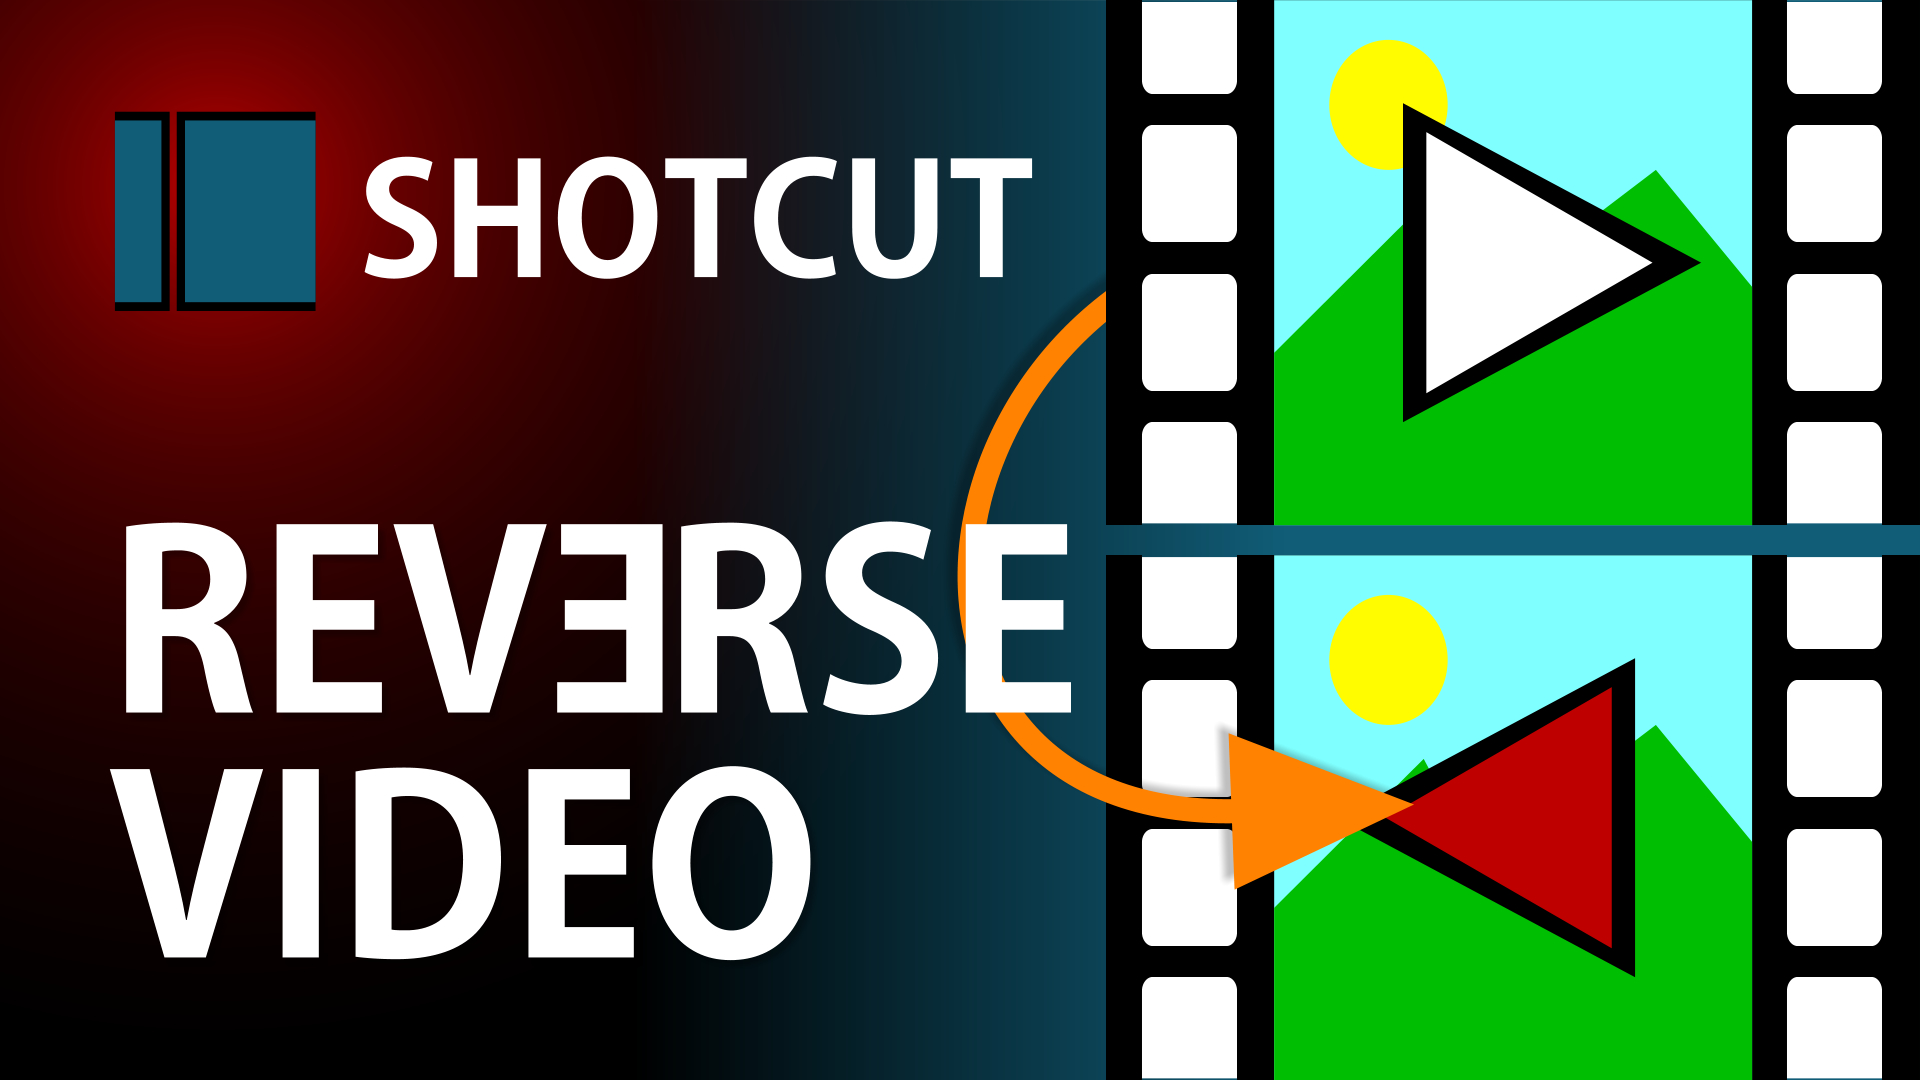 How to reverse video in ShotCut Free Editor | Play video backwards tutorial